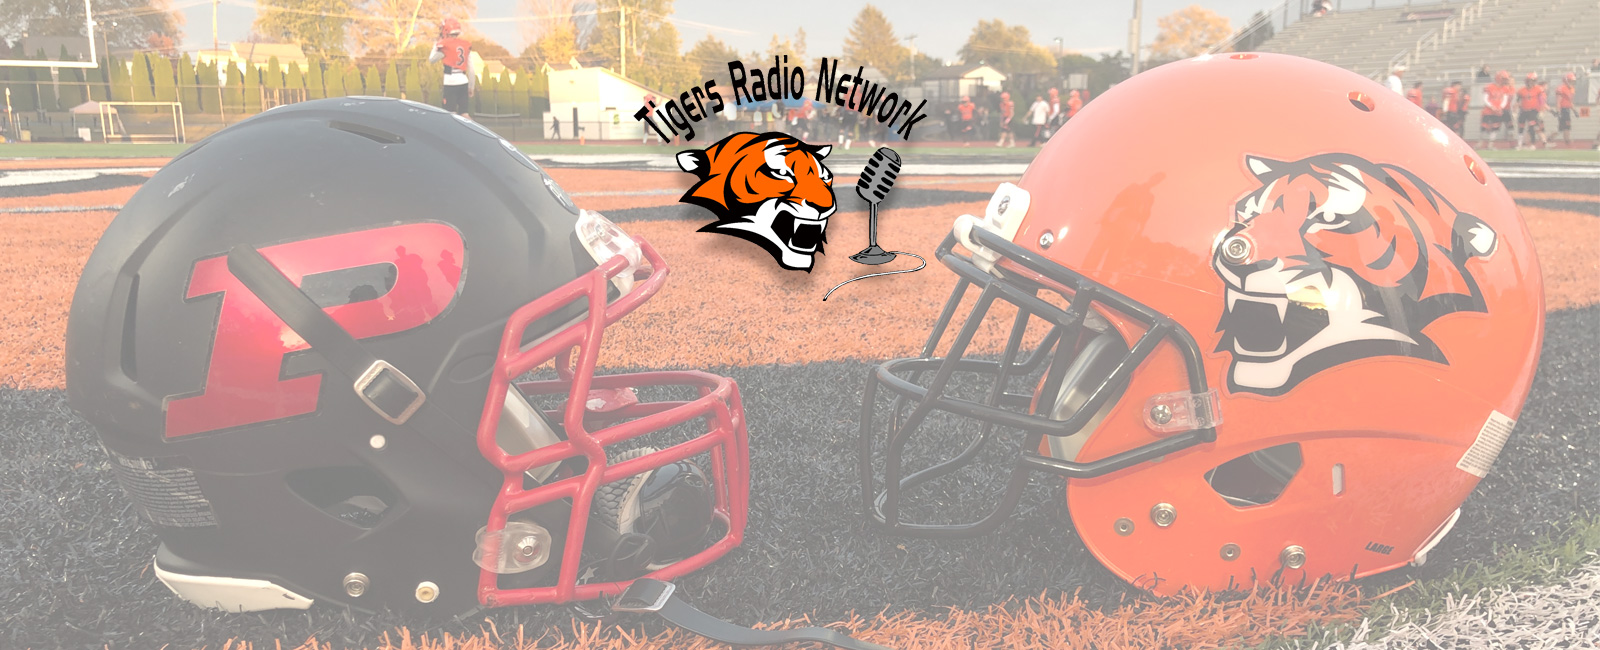 Full audio archive of Penncrest at Marple Newtown from Wednesday, 11-24-21